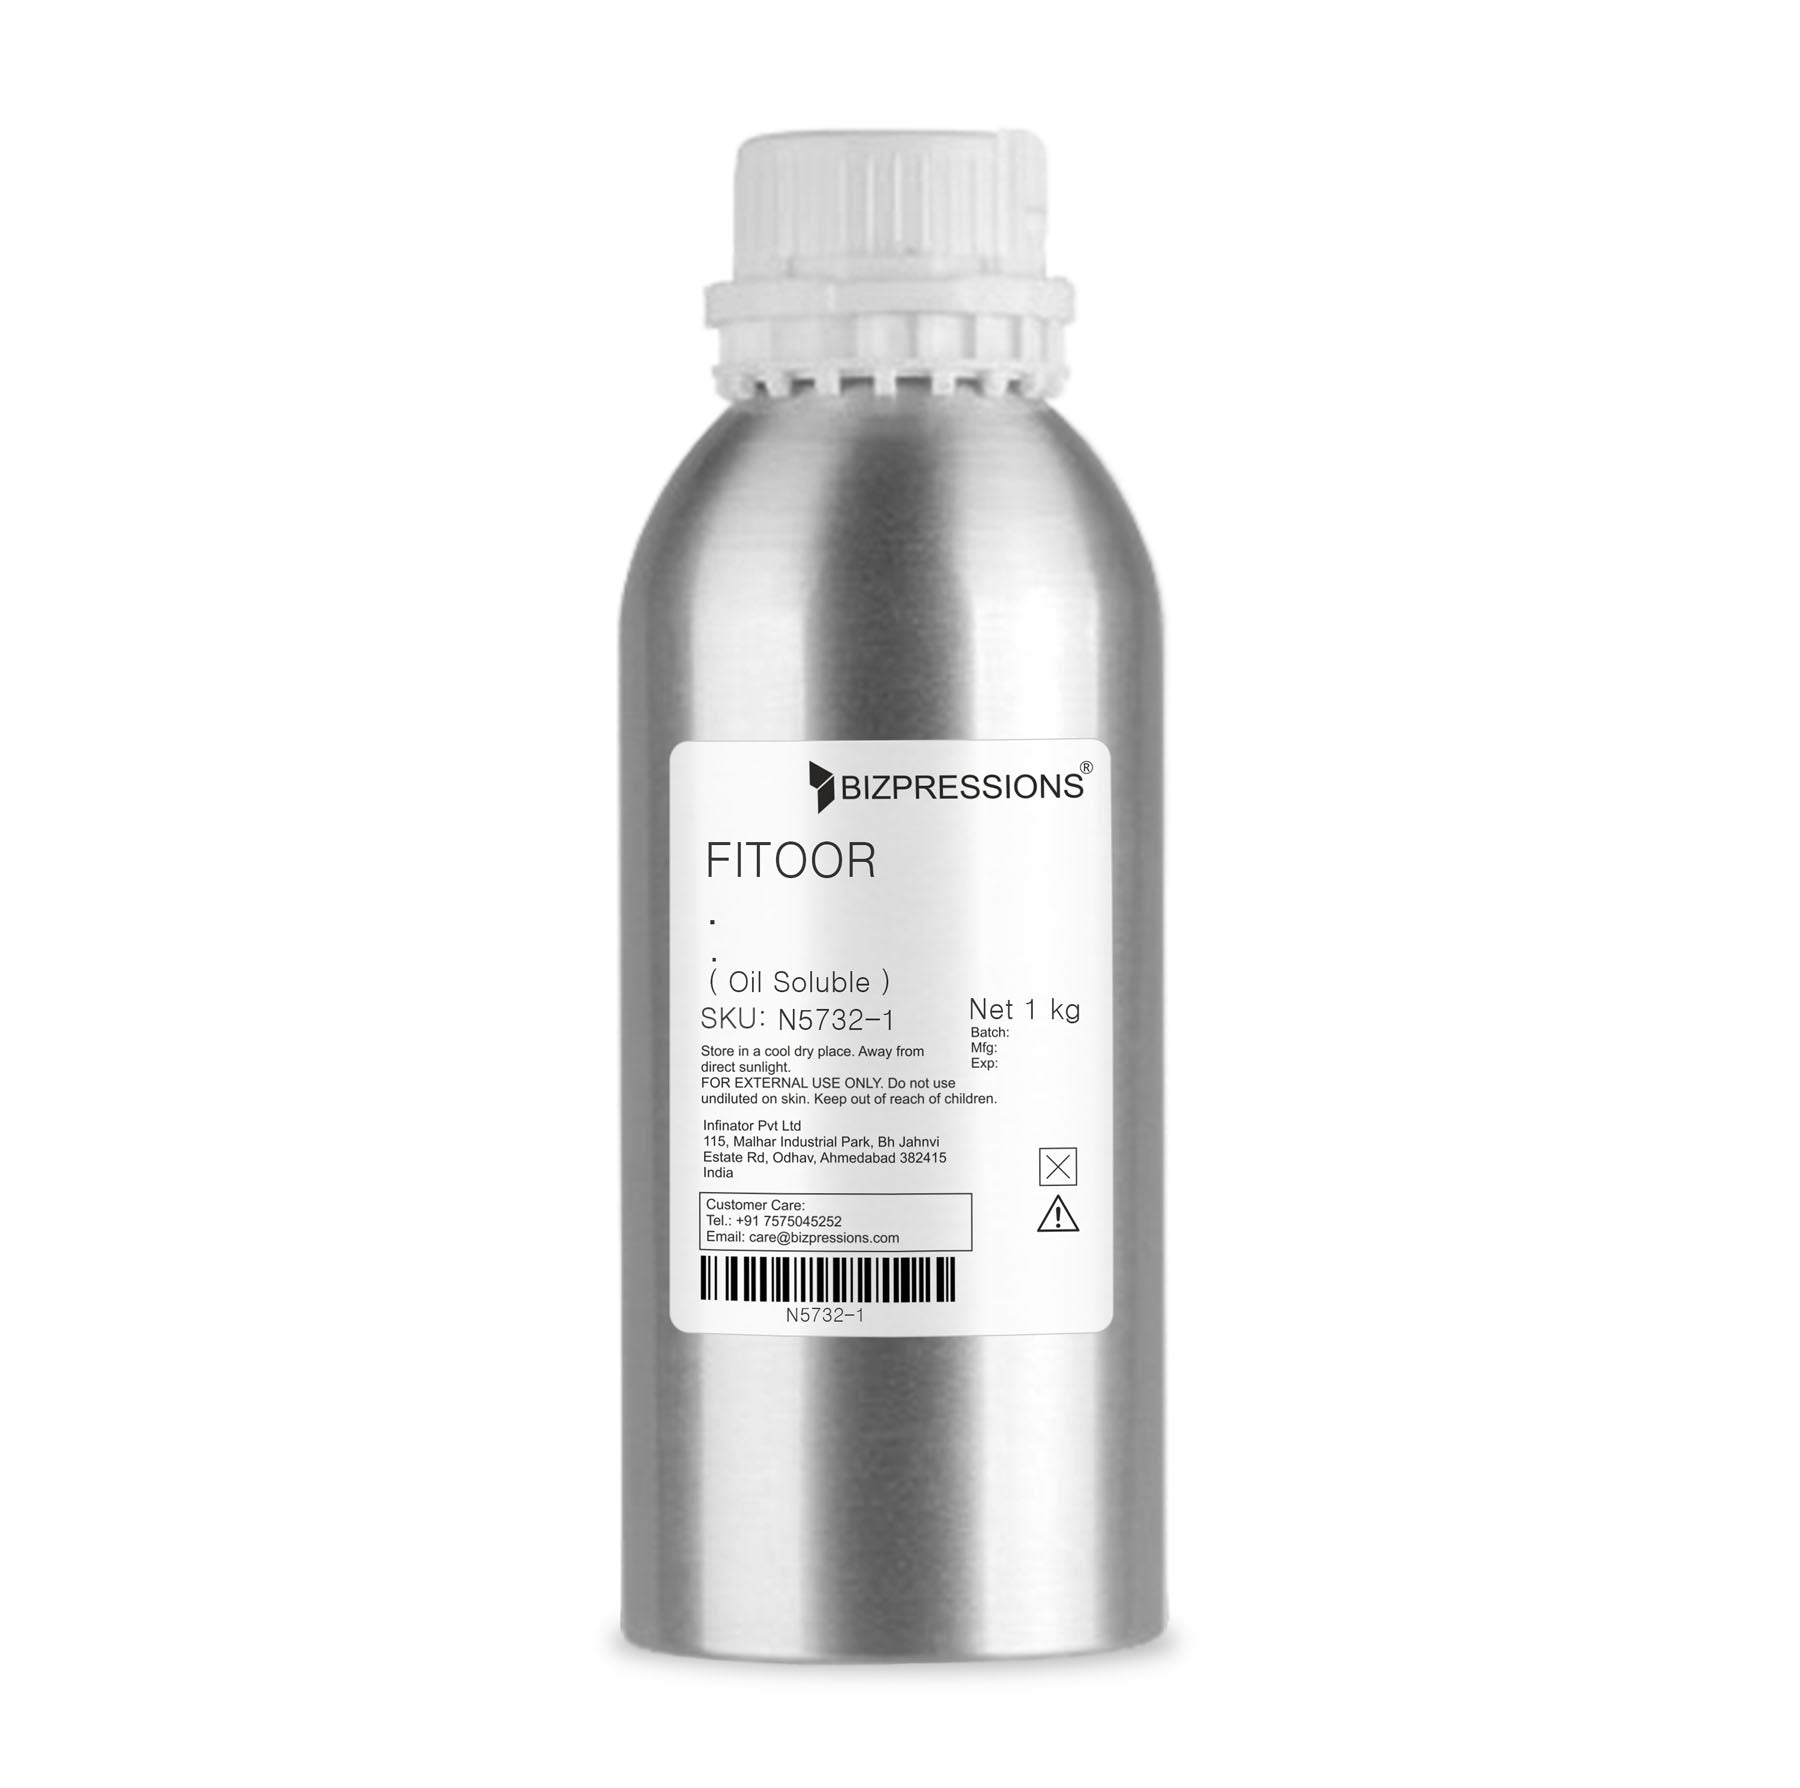 FITOOR - Fragrance ( Oil Soluble ) - 1 kg